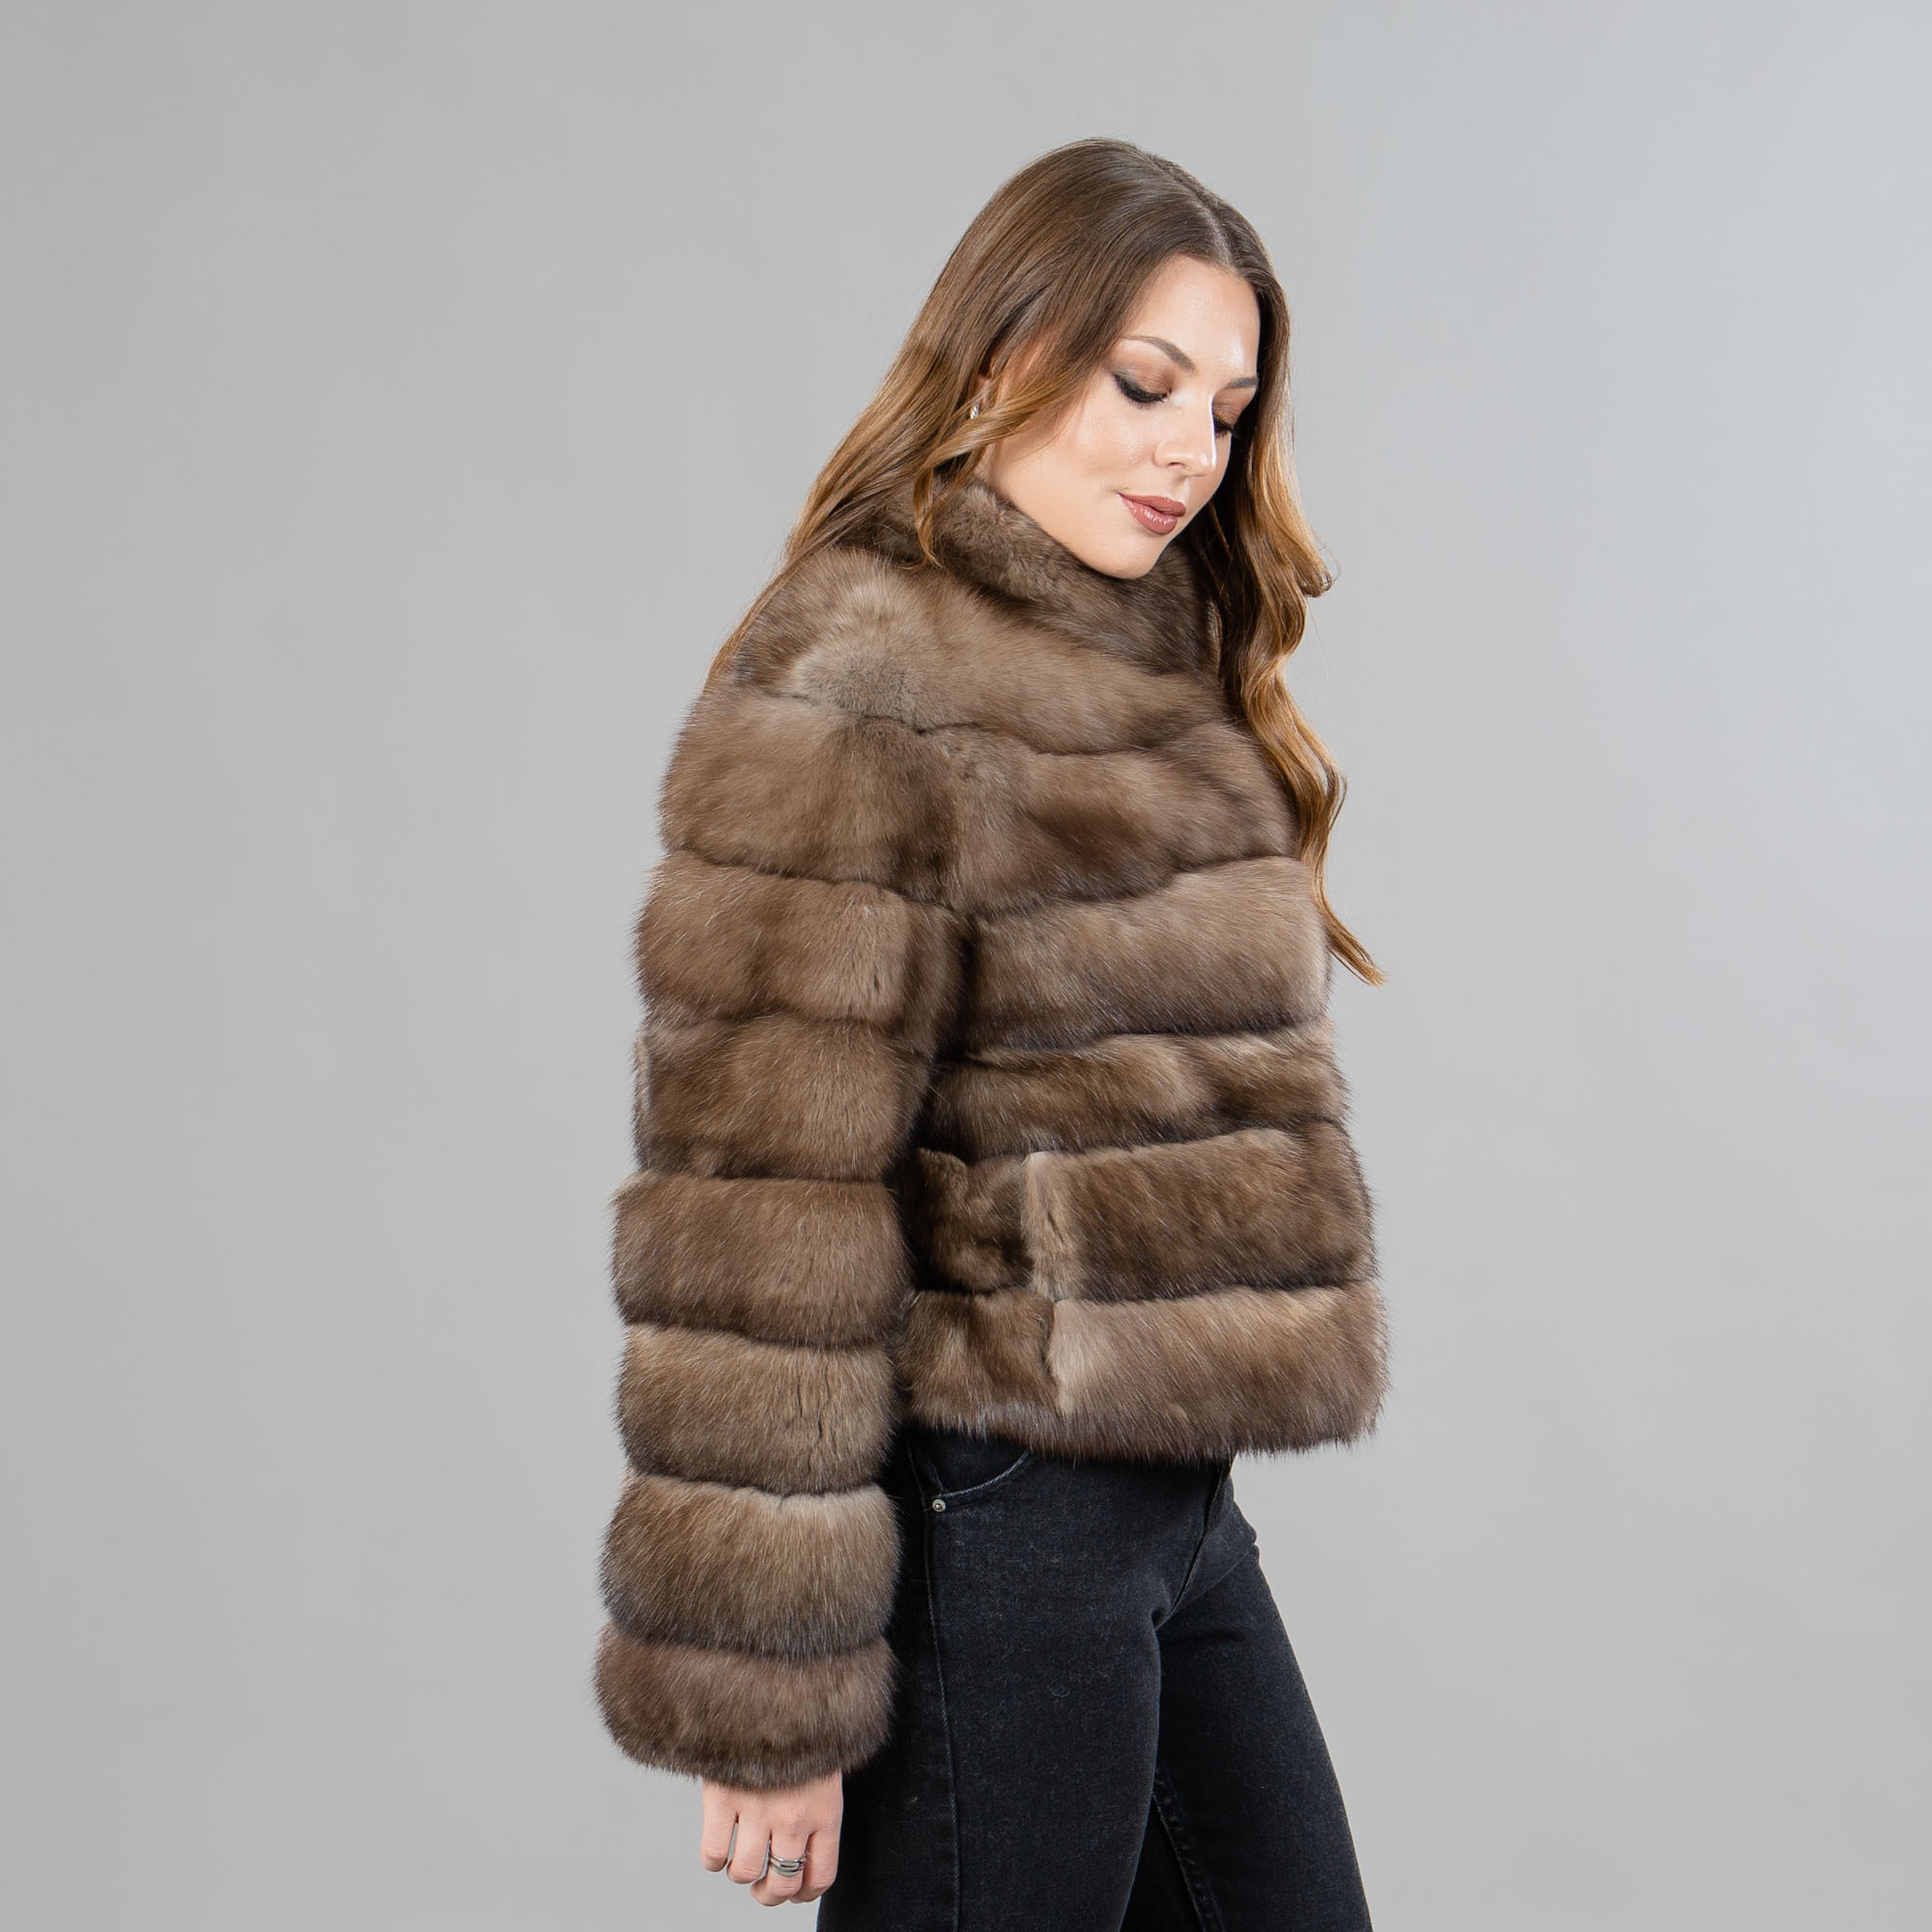 Sable fur jacket with a collar in brown color